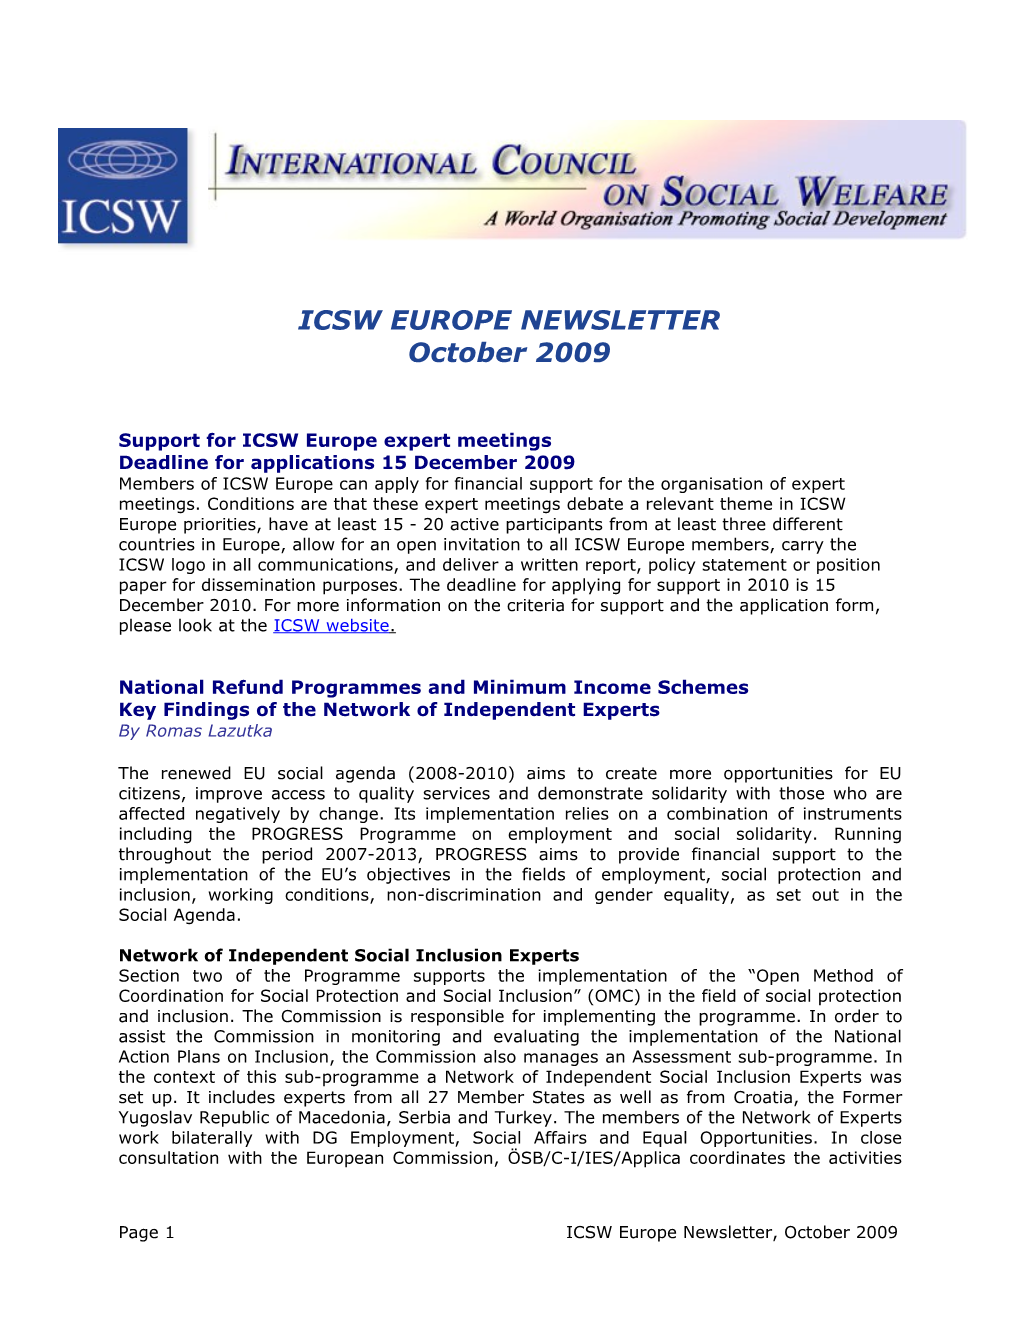 Support for ICSW Europe Expert Meetings